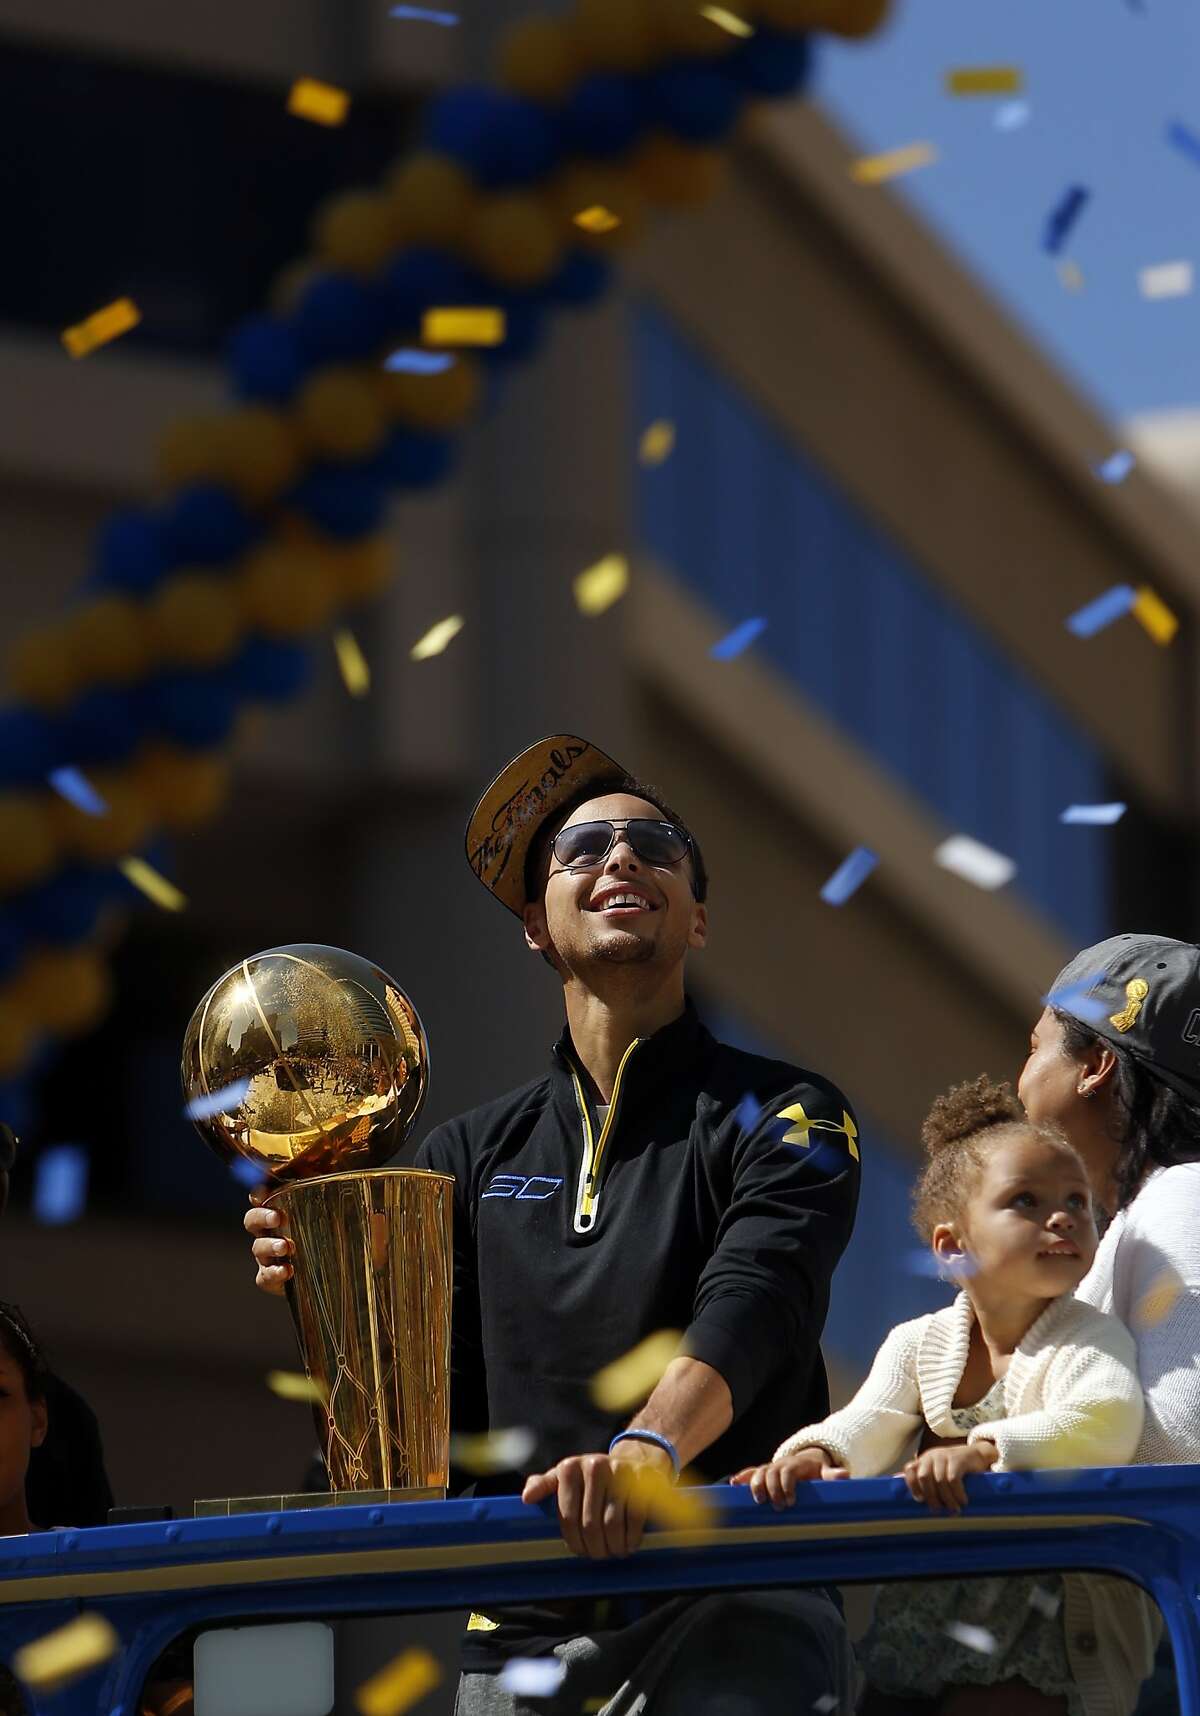 Stephen Curry and his daughter Riley soak in the atmosphere during Golden State Warriors' victory parade down Broadway in Oakland, Calif., on Friday, June 19, 2015.